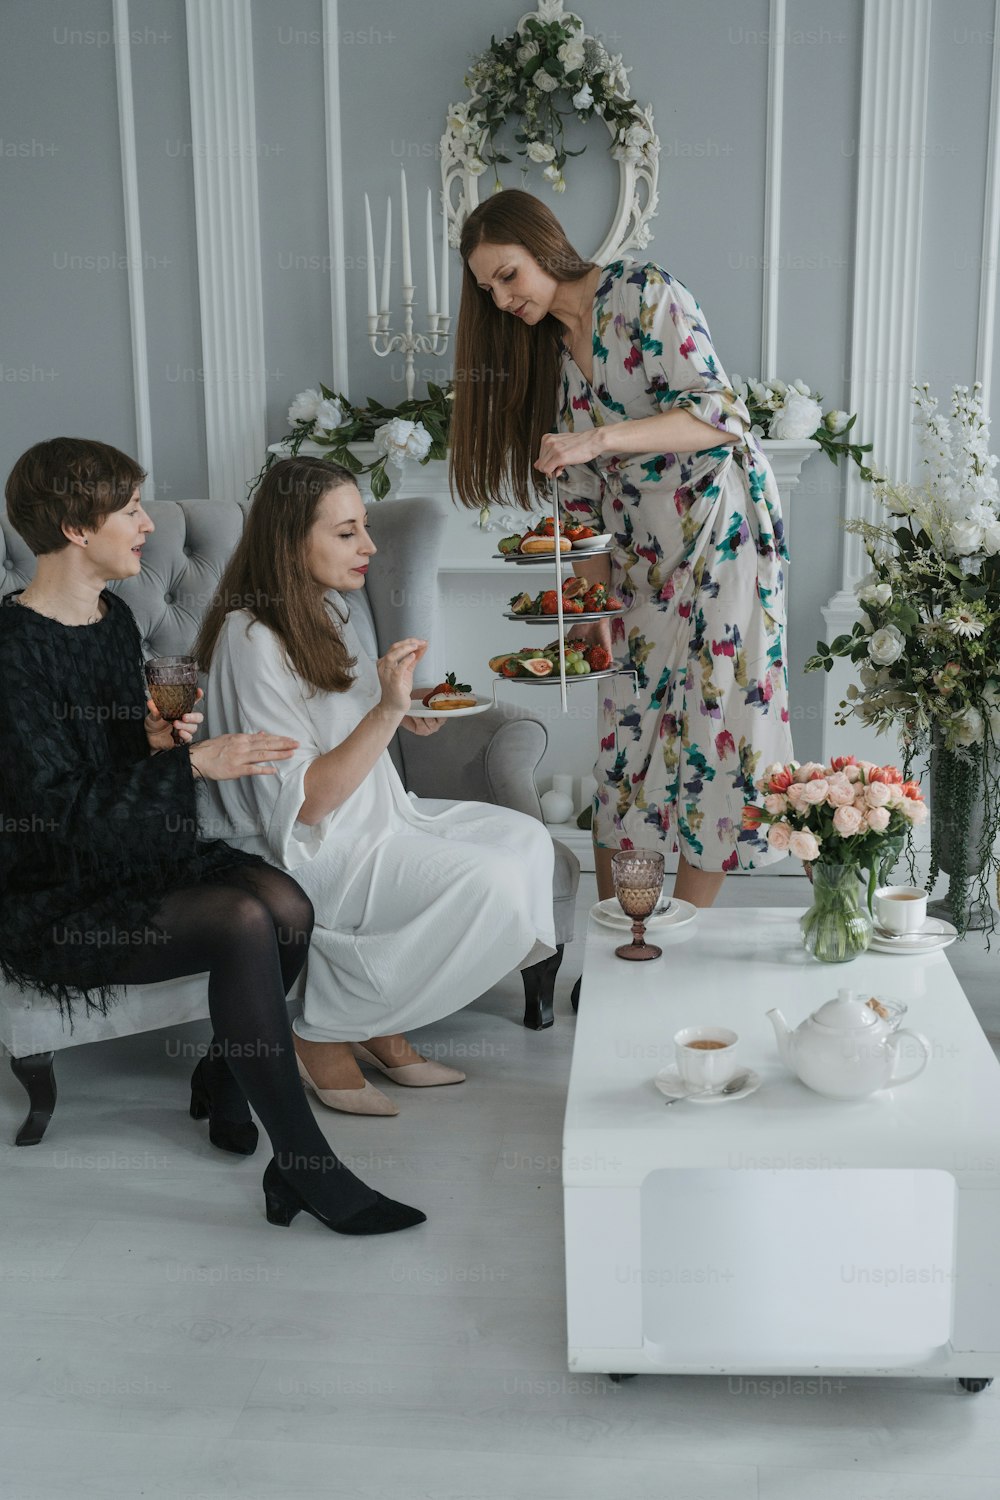 a woman in a floral dress is serving tea to two other women